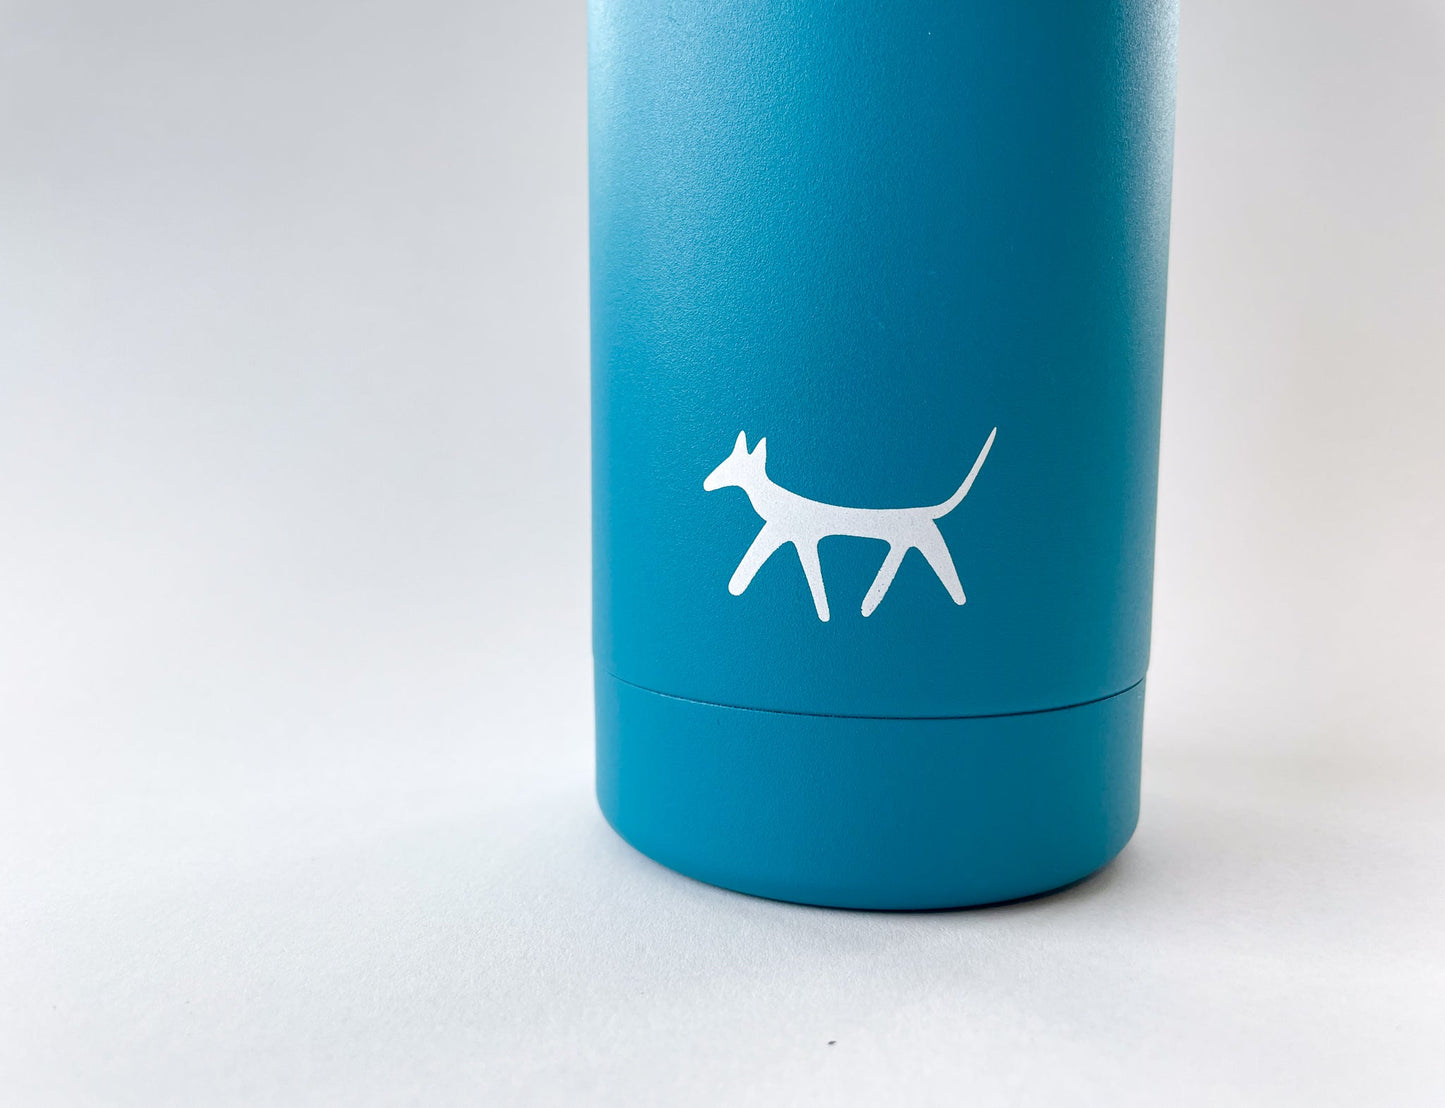 Detail of the Droggo logo in cream colour in front of the lake water bottle. White background.